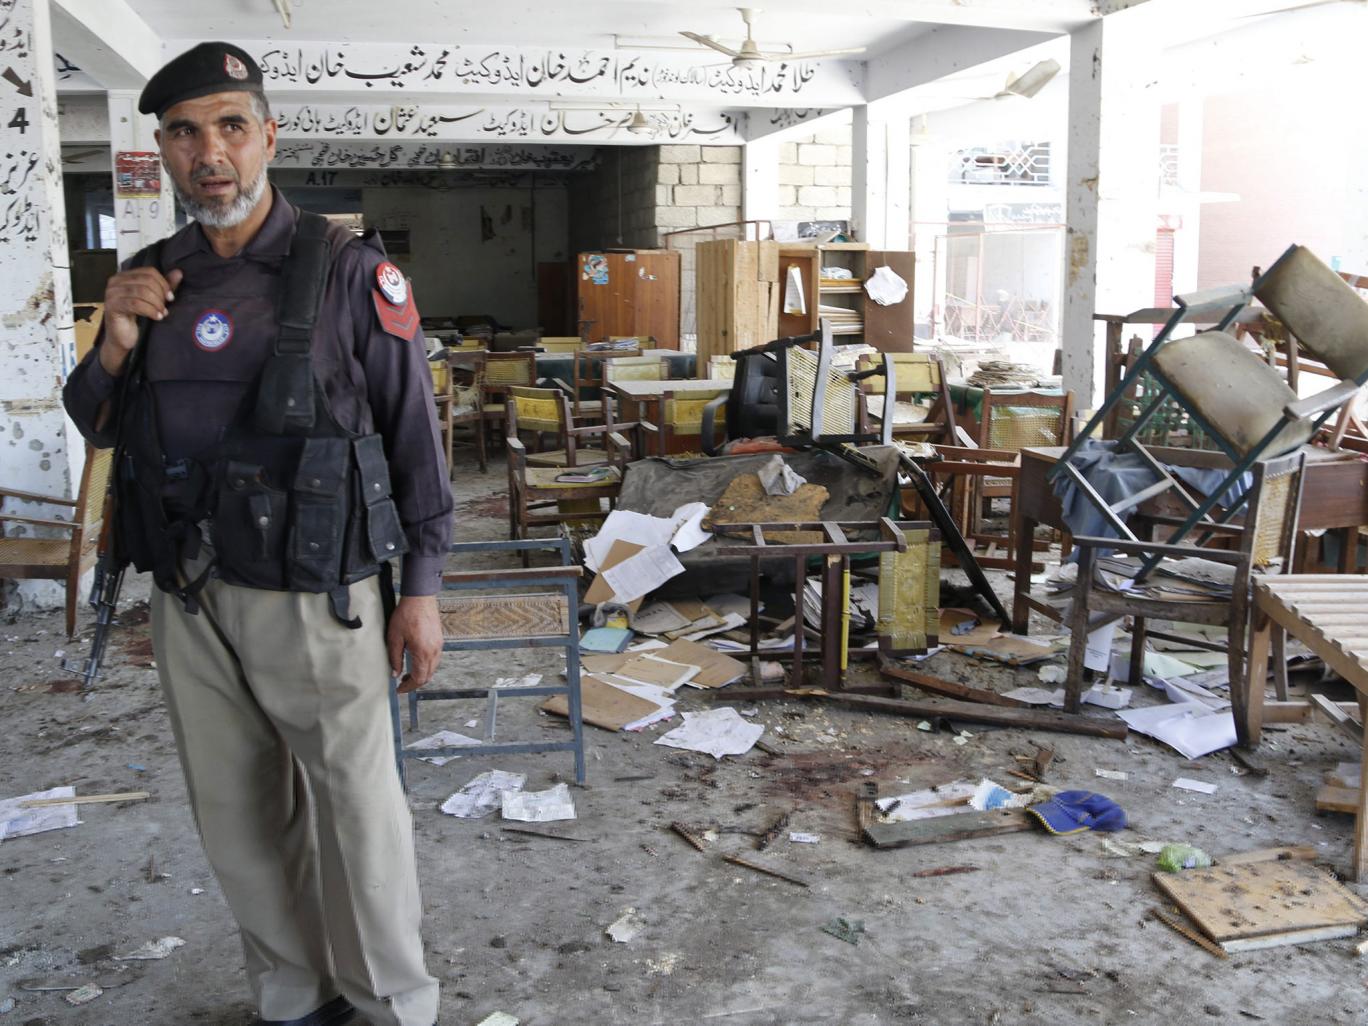 Suicide Bombing During Friday Prayer in Peshawar Mosque Claimed at least 16 Lives